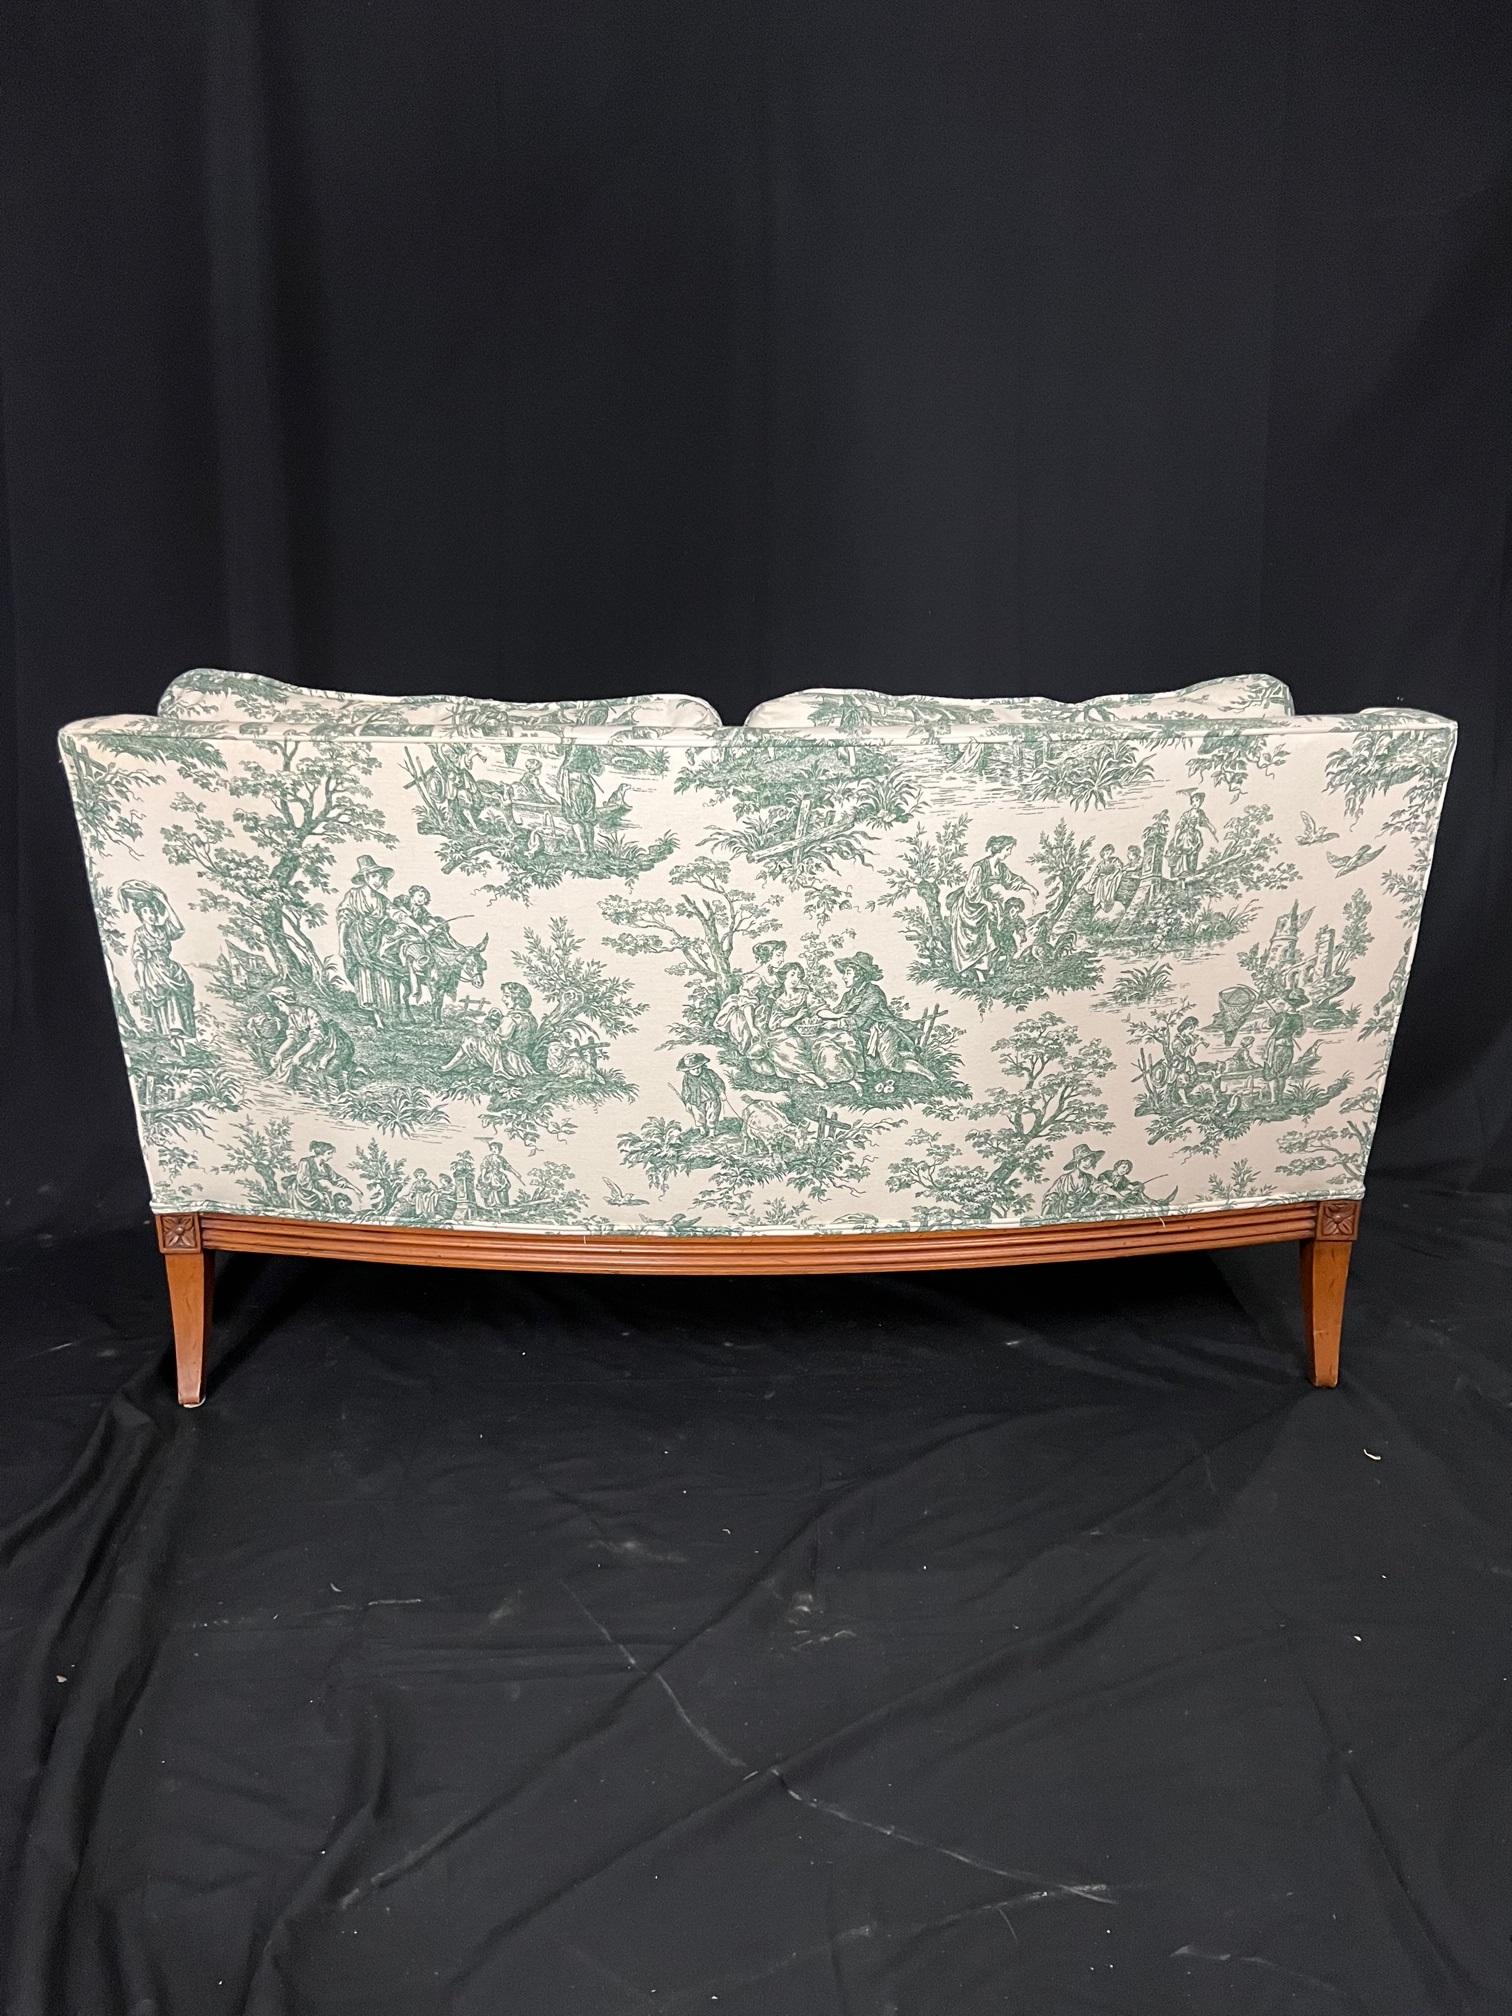 Lovely French Toile Covered Carved Walnut Louis XVI Style Canape Walnut Sofa 4